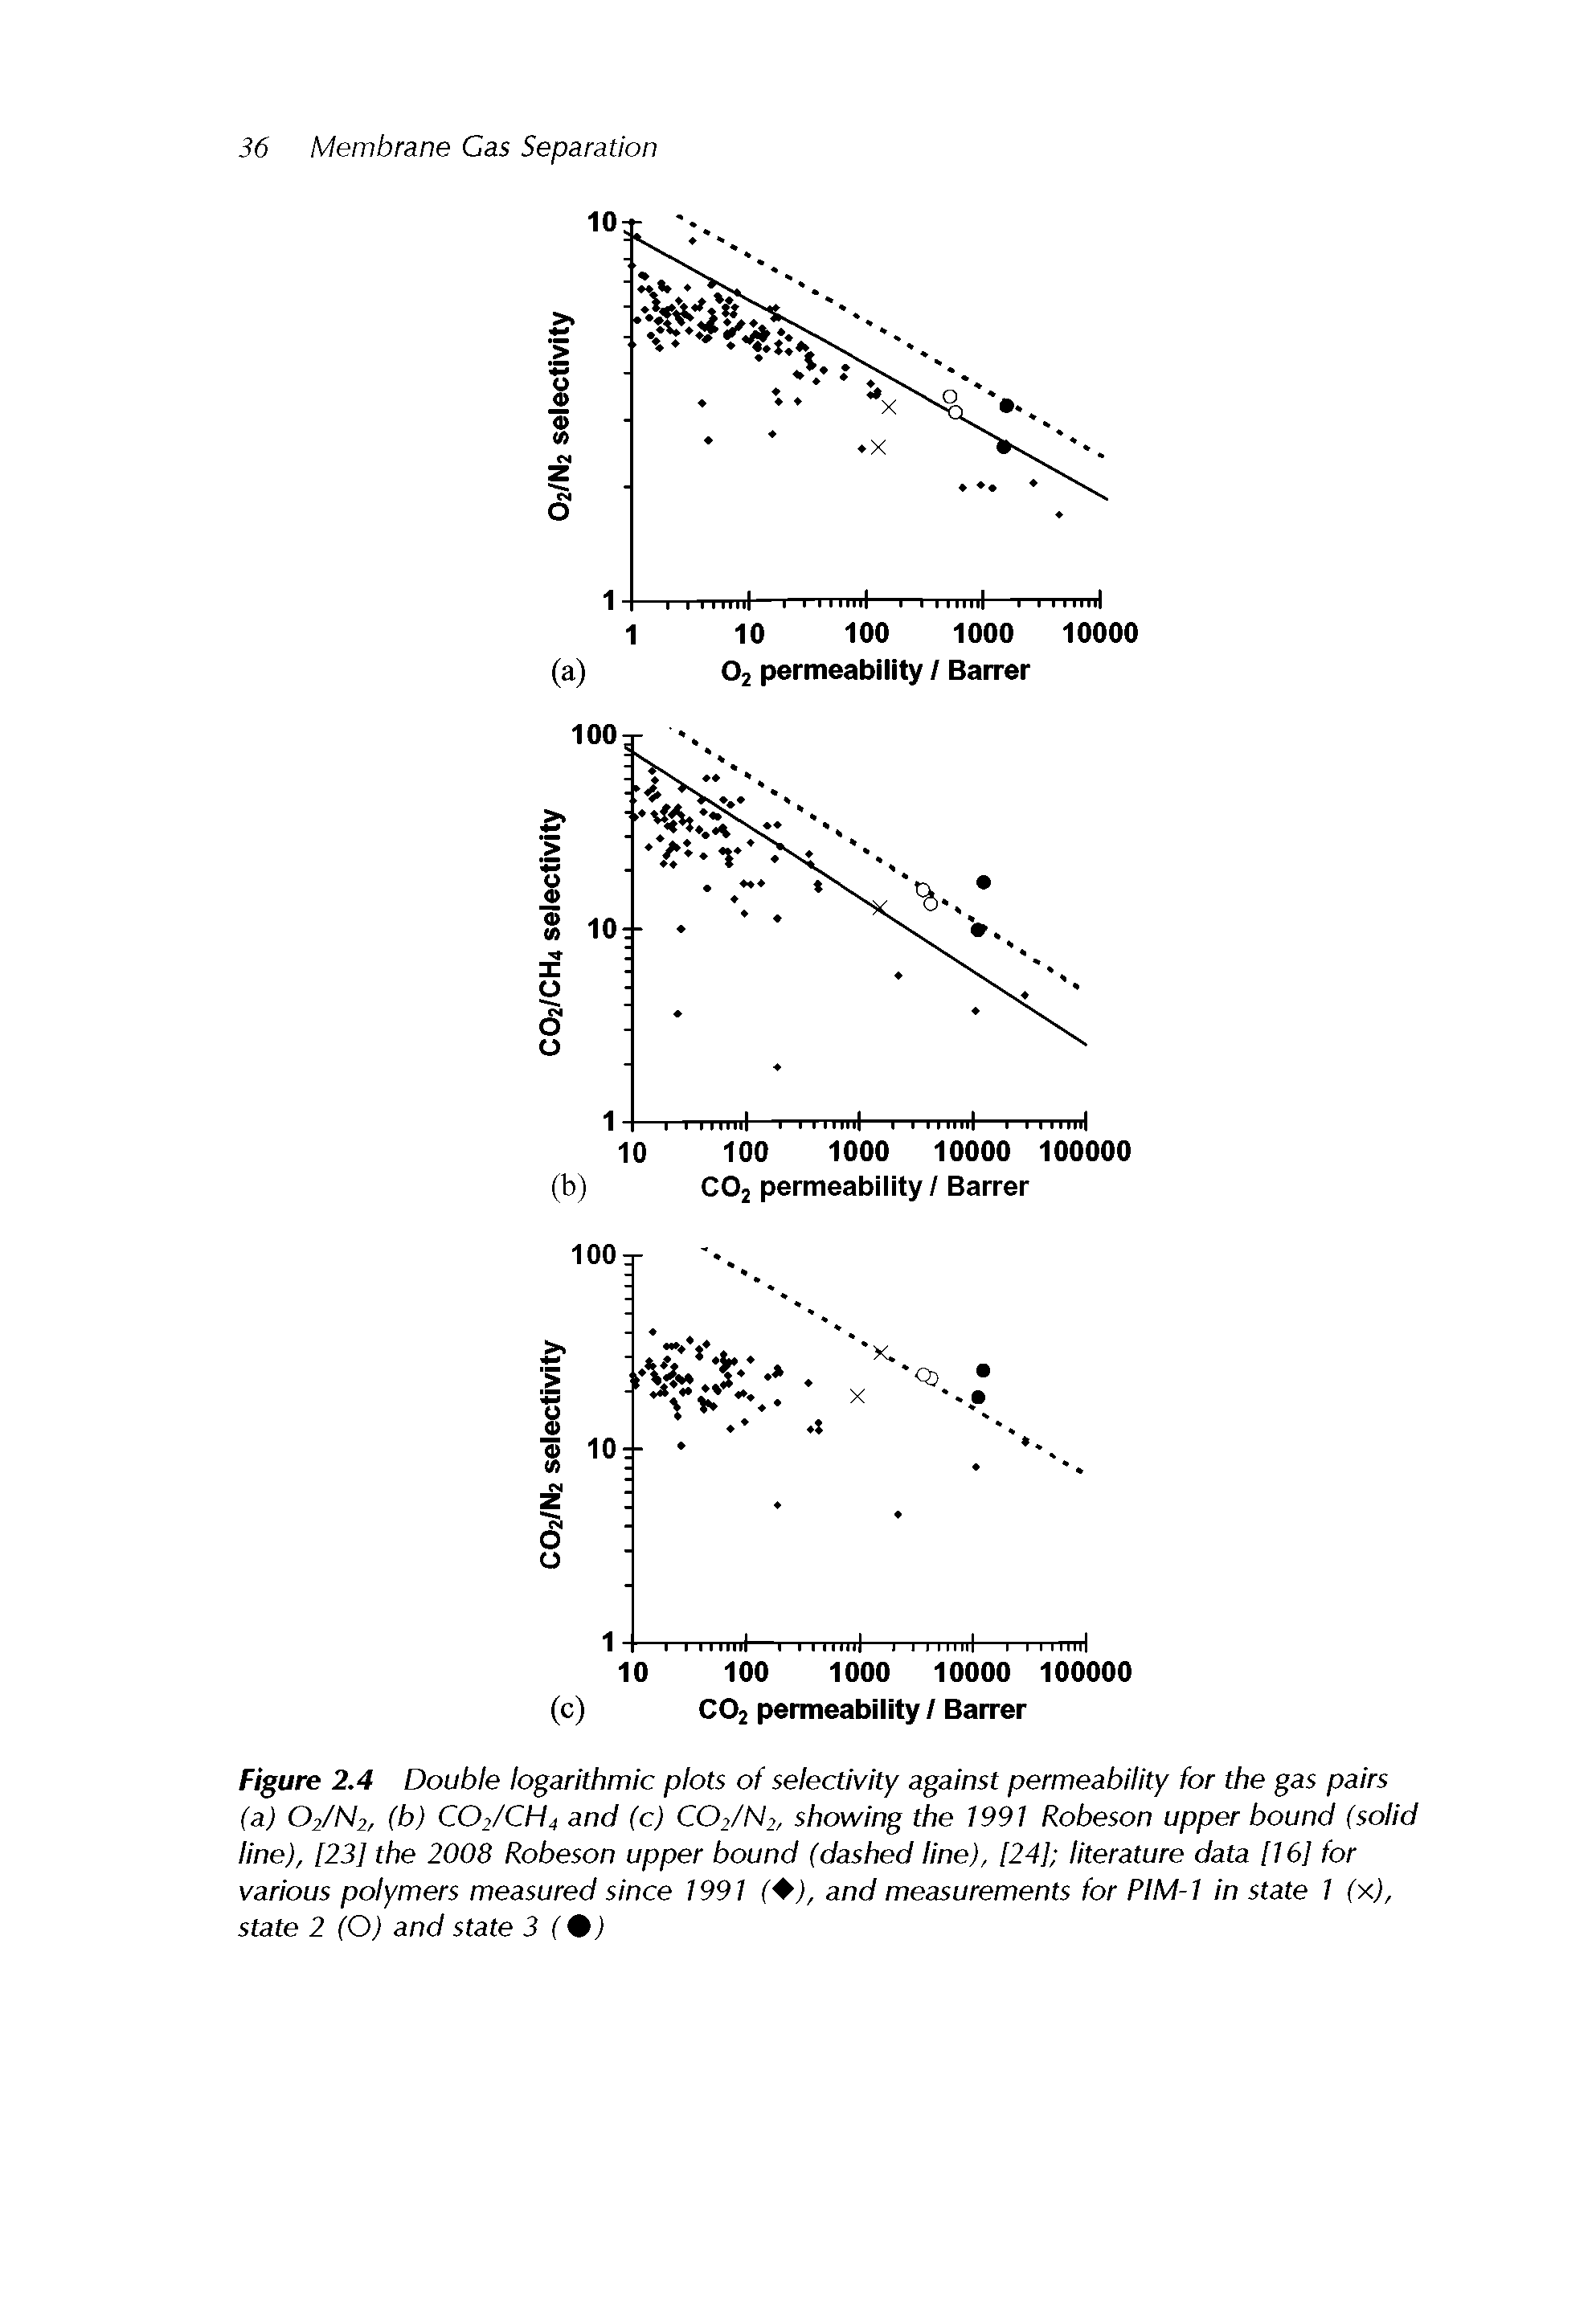 Figure 2.4 Double logarithmic plots of selectivity against permeability for the gas pairs (a) O2/N2, (b) CO2/CH4 and (c) CO2/N2, showing the 1991 Robeson upper bound (solid line), [23] the 2008 Robeson upper bound (dashed line), [24] literature data [16] for various polymers measured since 1991 ( j, and measurements for PlM-1 in state 1 (x), state 2 (O) and state 3 (%)...